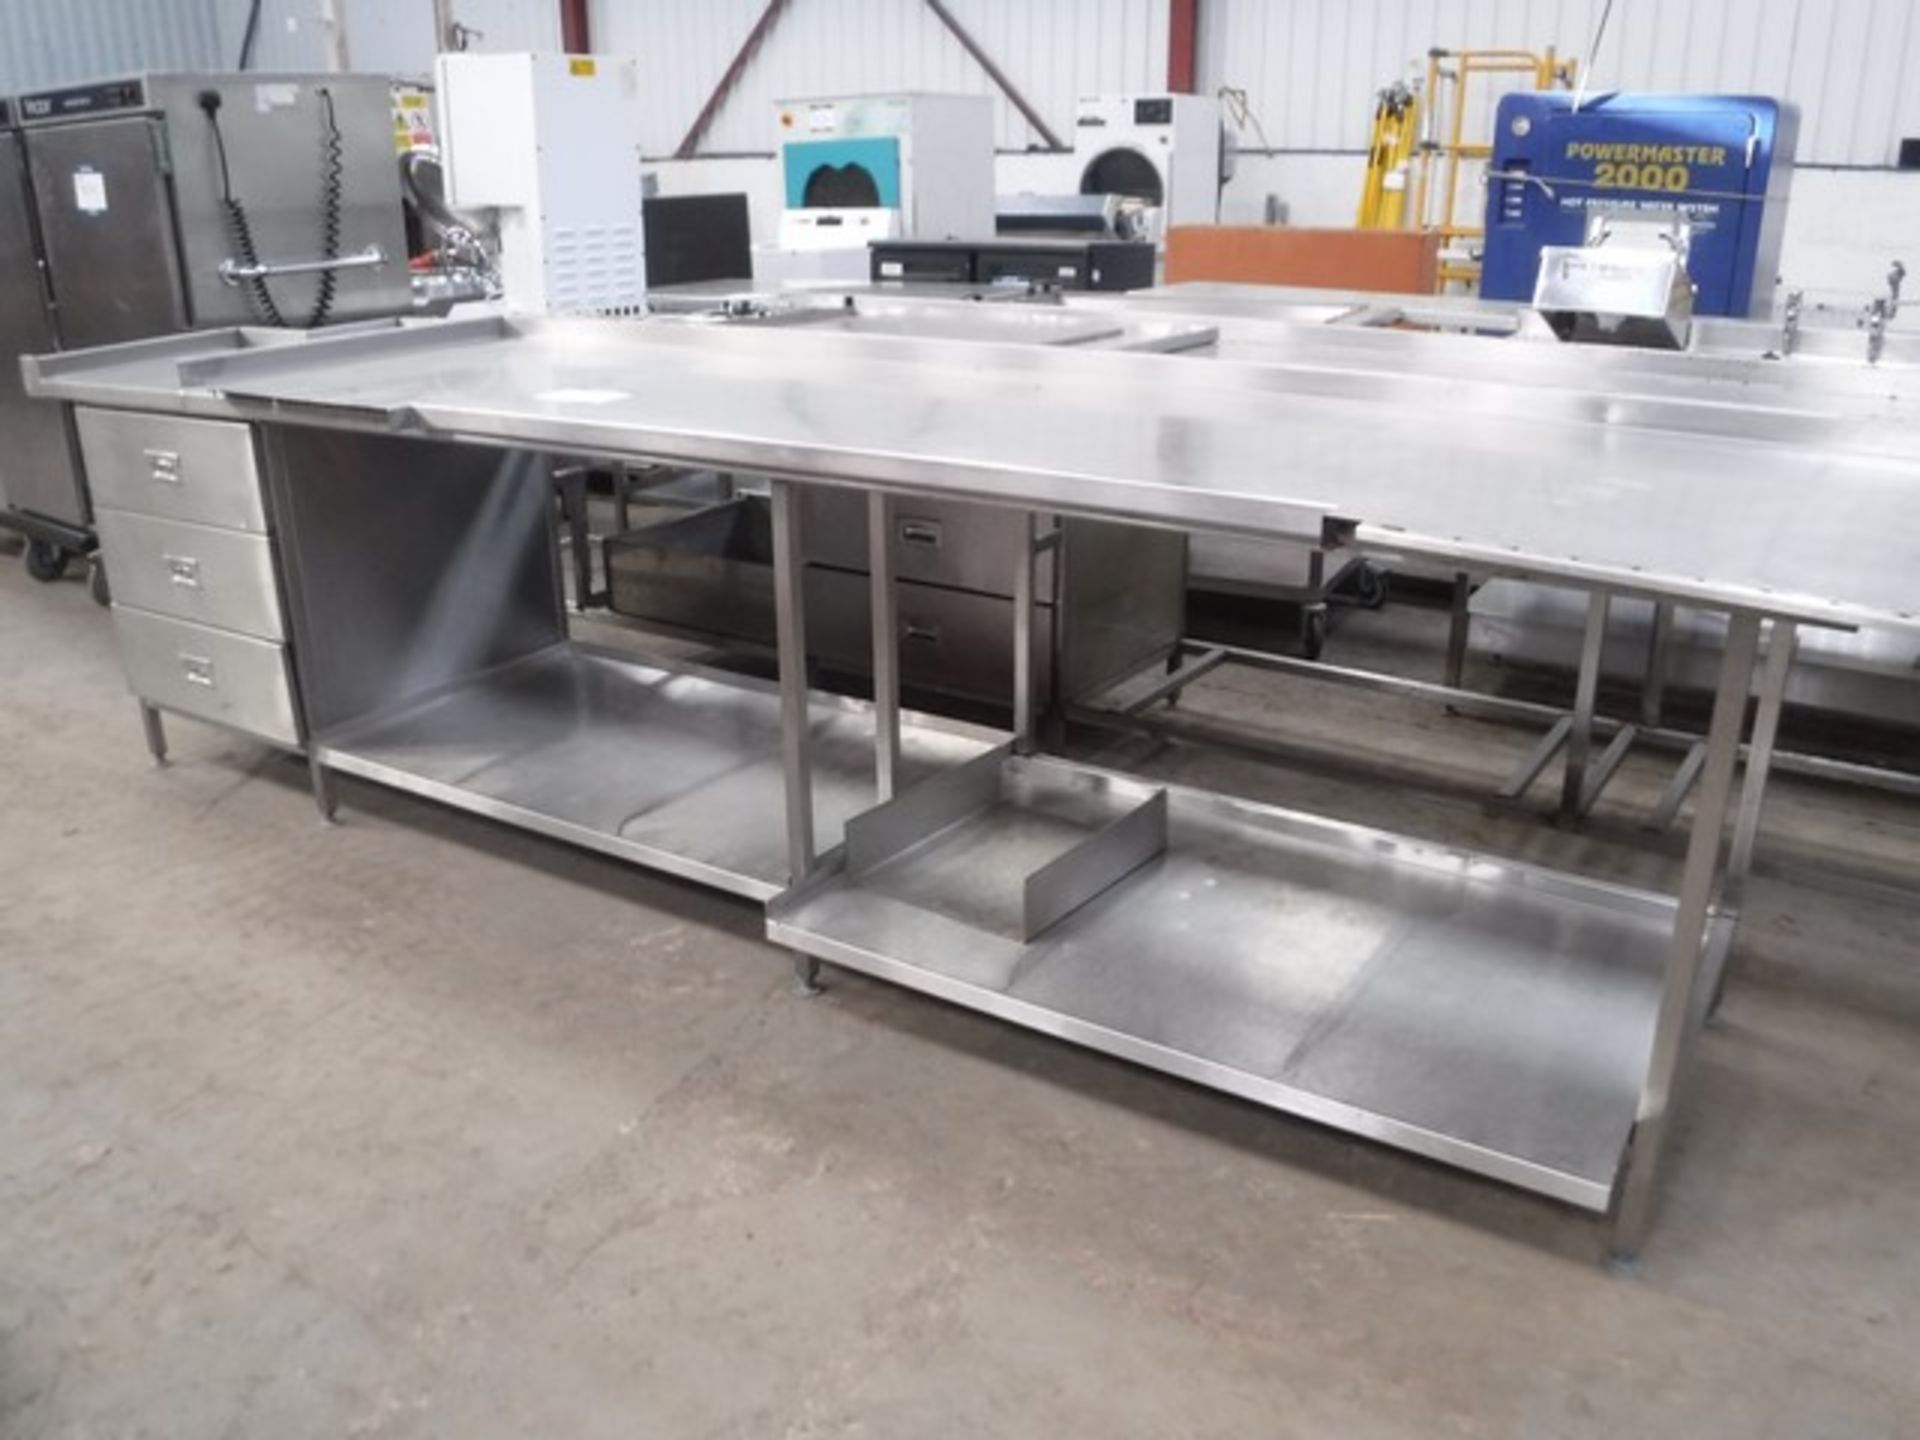 STAINLESS STEEL BENCH C/ DRAWERS 3700x800